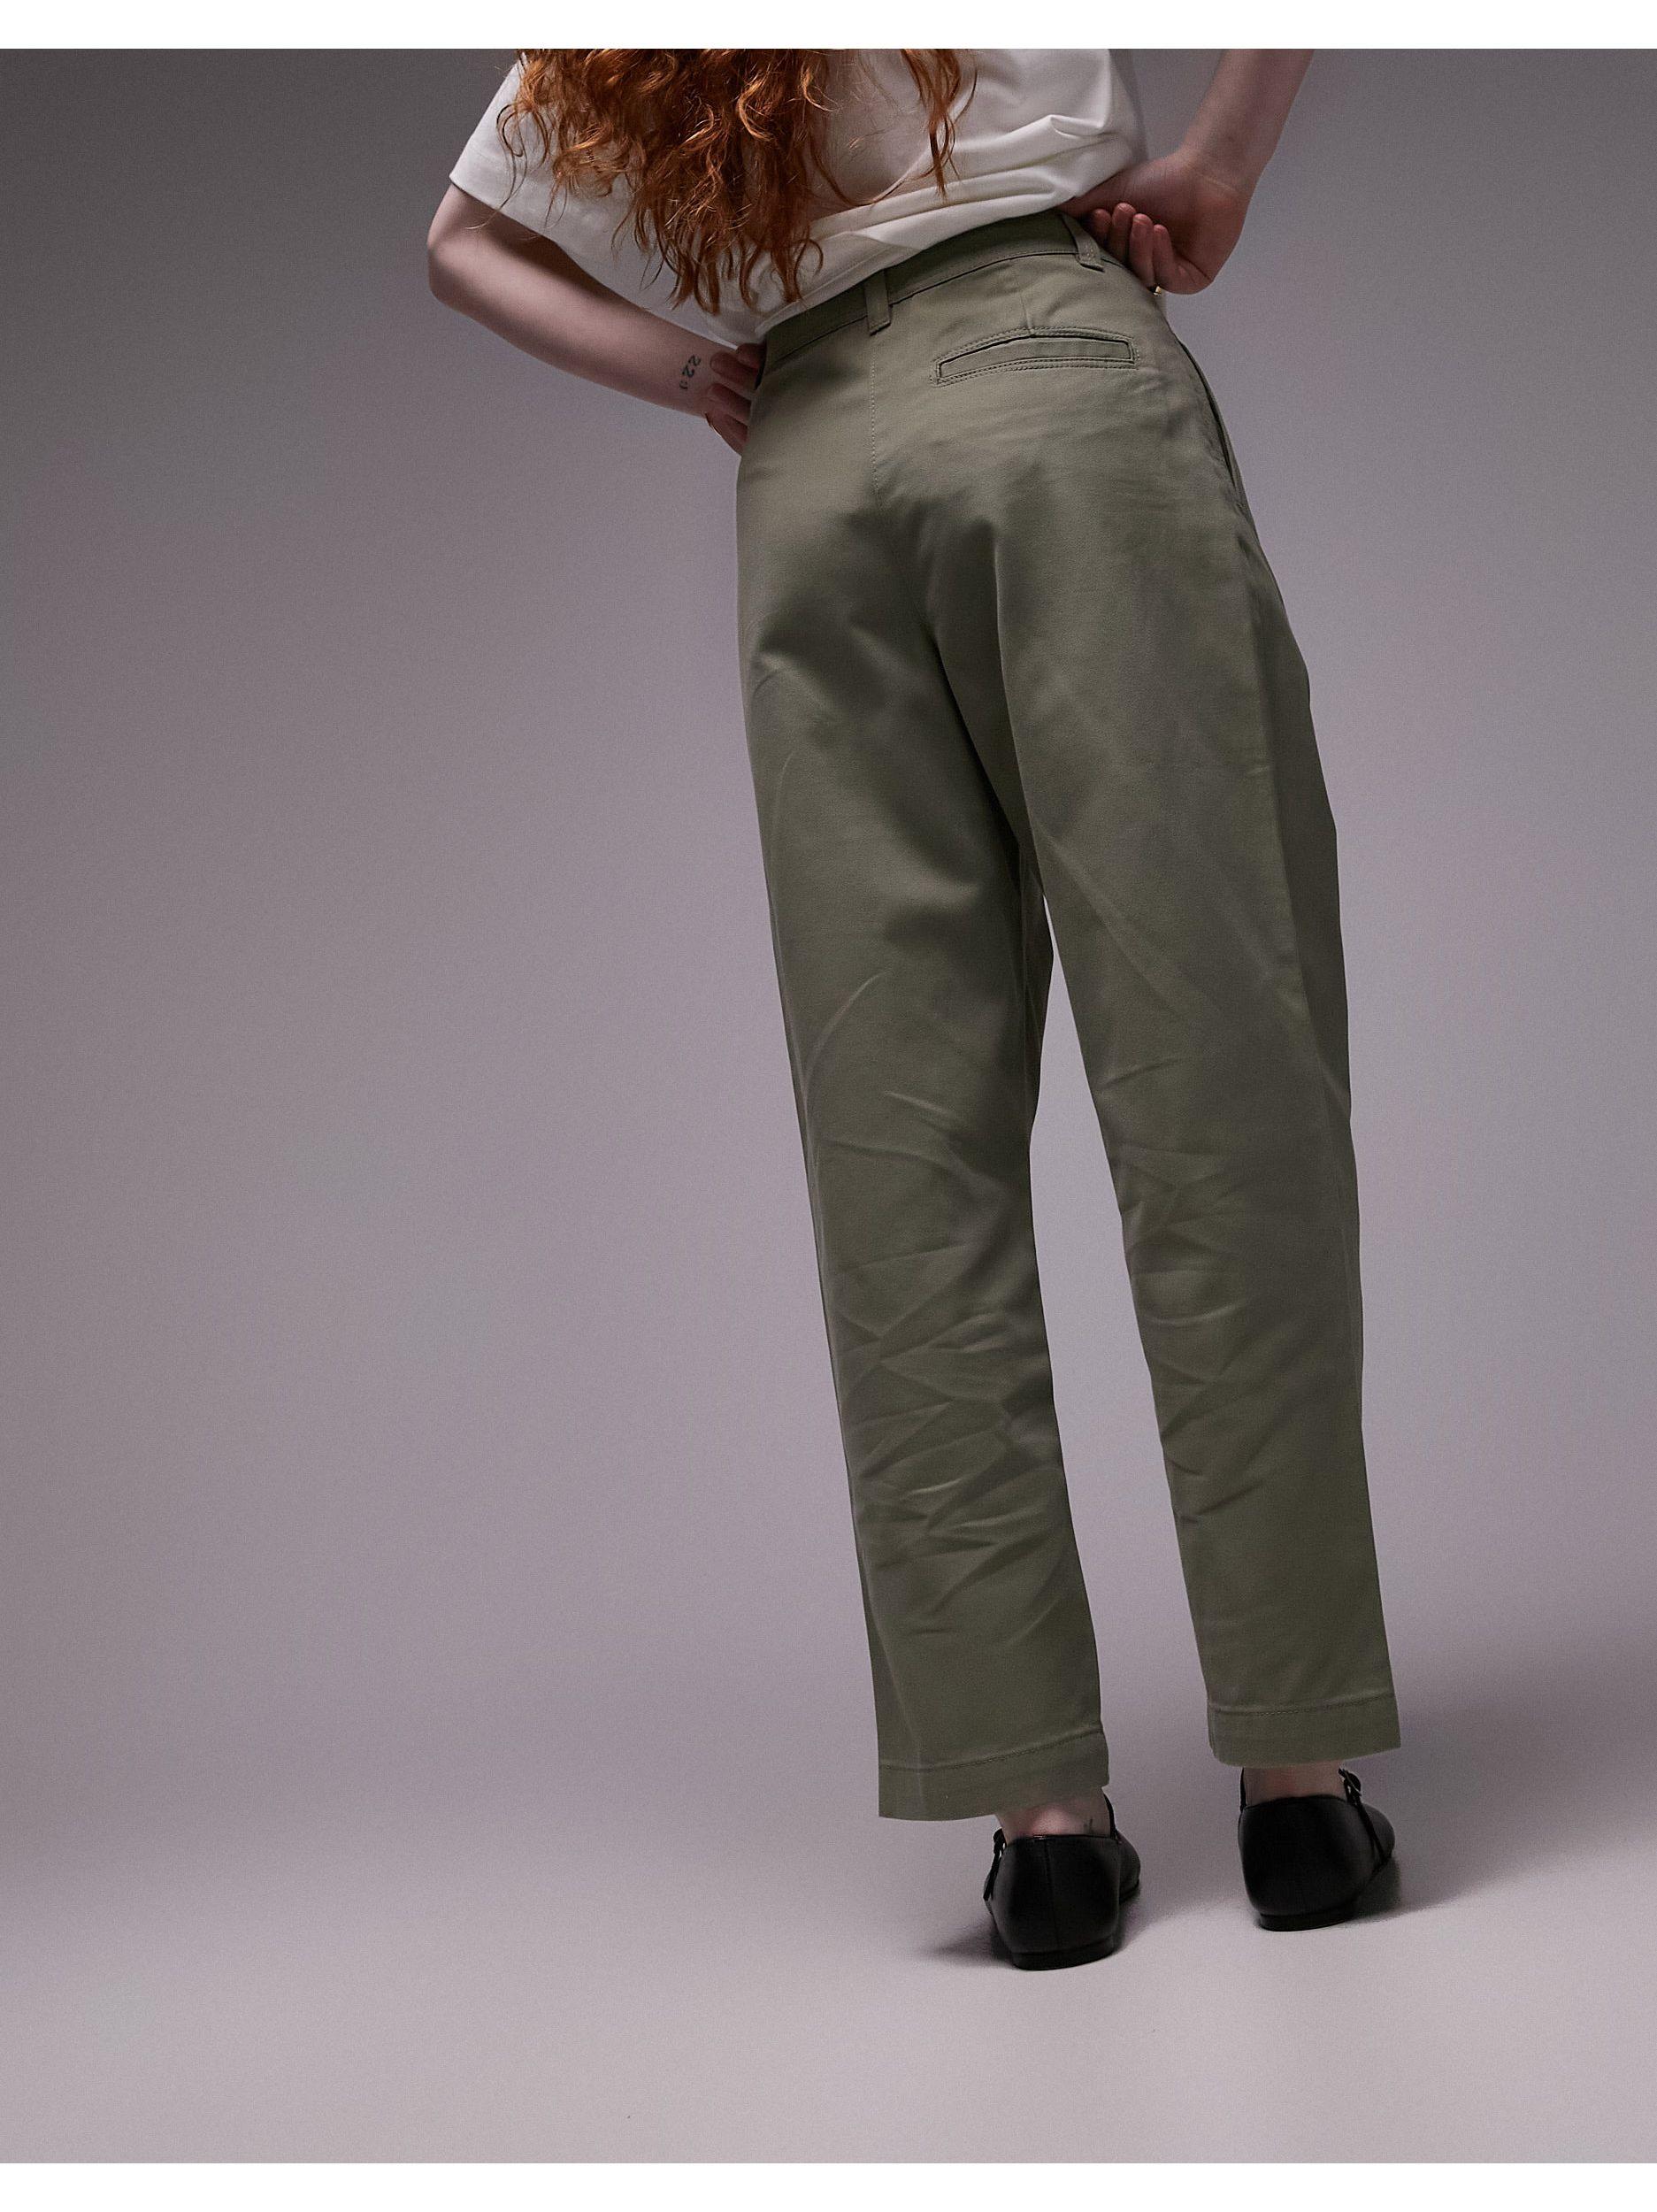 2DXuixsh Pants for Women Peg Pants with Tie Womens Cargo Pants with Pockets  Outdoor Casual Ripstop Camo Construction Work Pants Flare Leggings Women's  Pants Polyester,Spandex Dark Gray L - Walmart.com